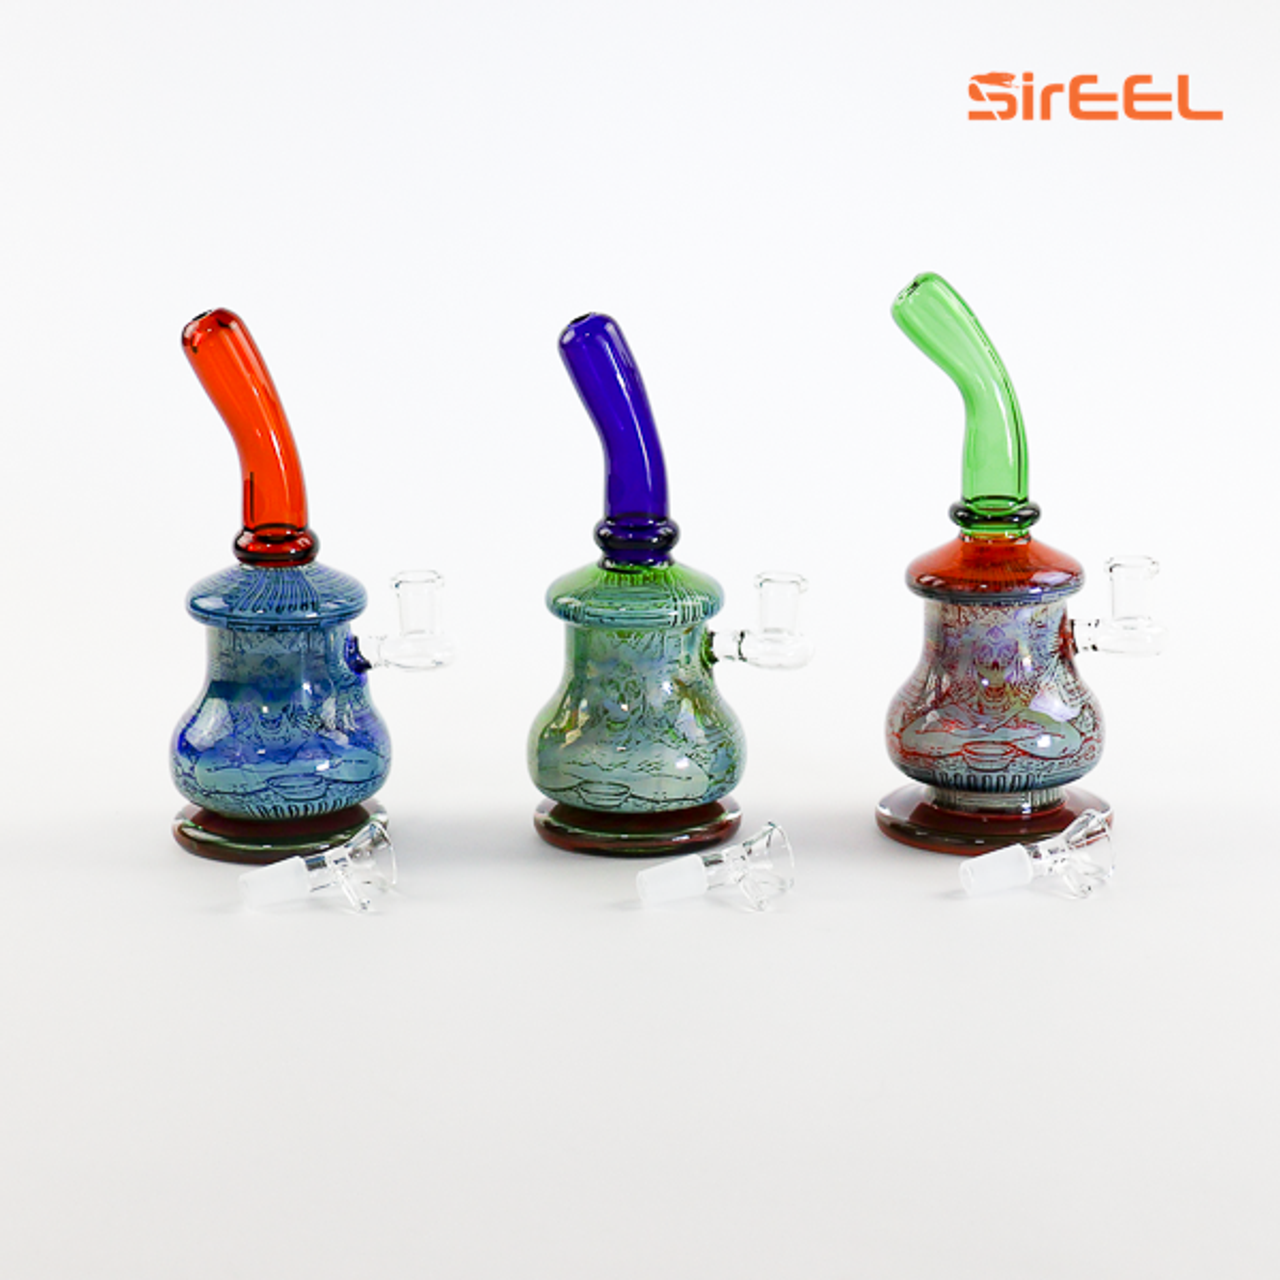 9" SirEEL Etched & Fumed Skull Design Rig with Flower Bowl | Assorted Colors